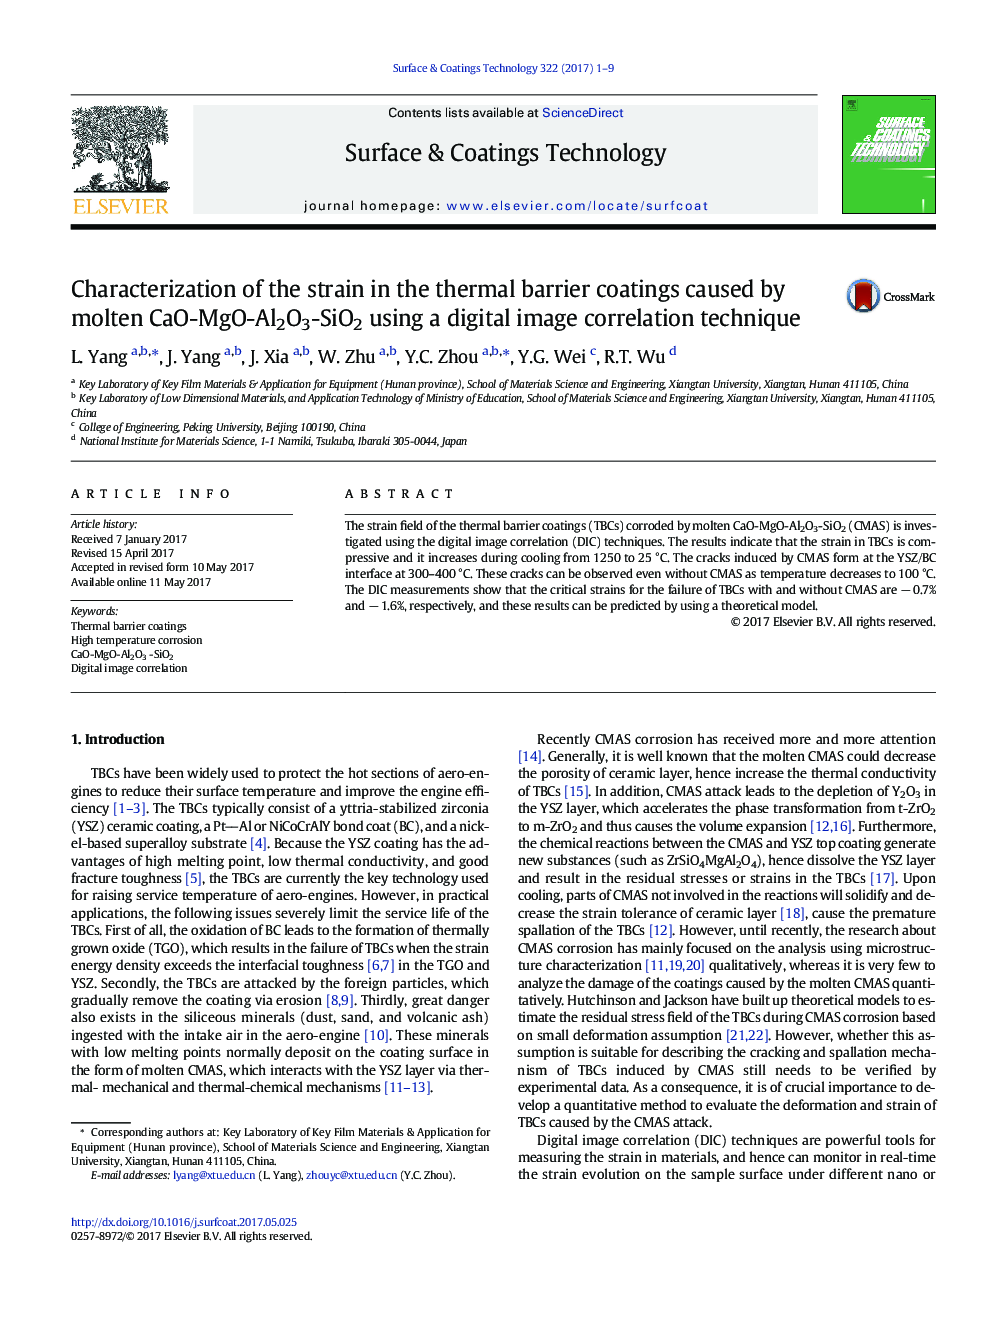 Characterization of the strain in the thermal barrier coatings caused by molten CaO-MgO-Al2O3-SiO2 using a digital image correlation technique